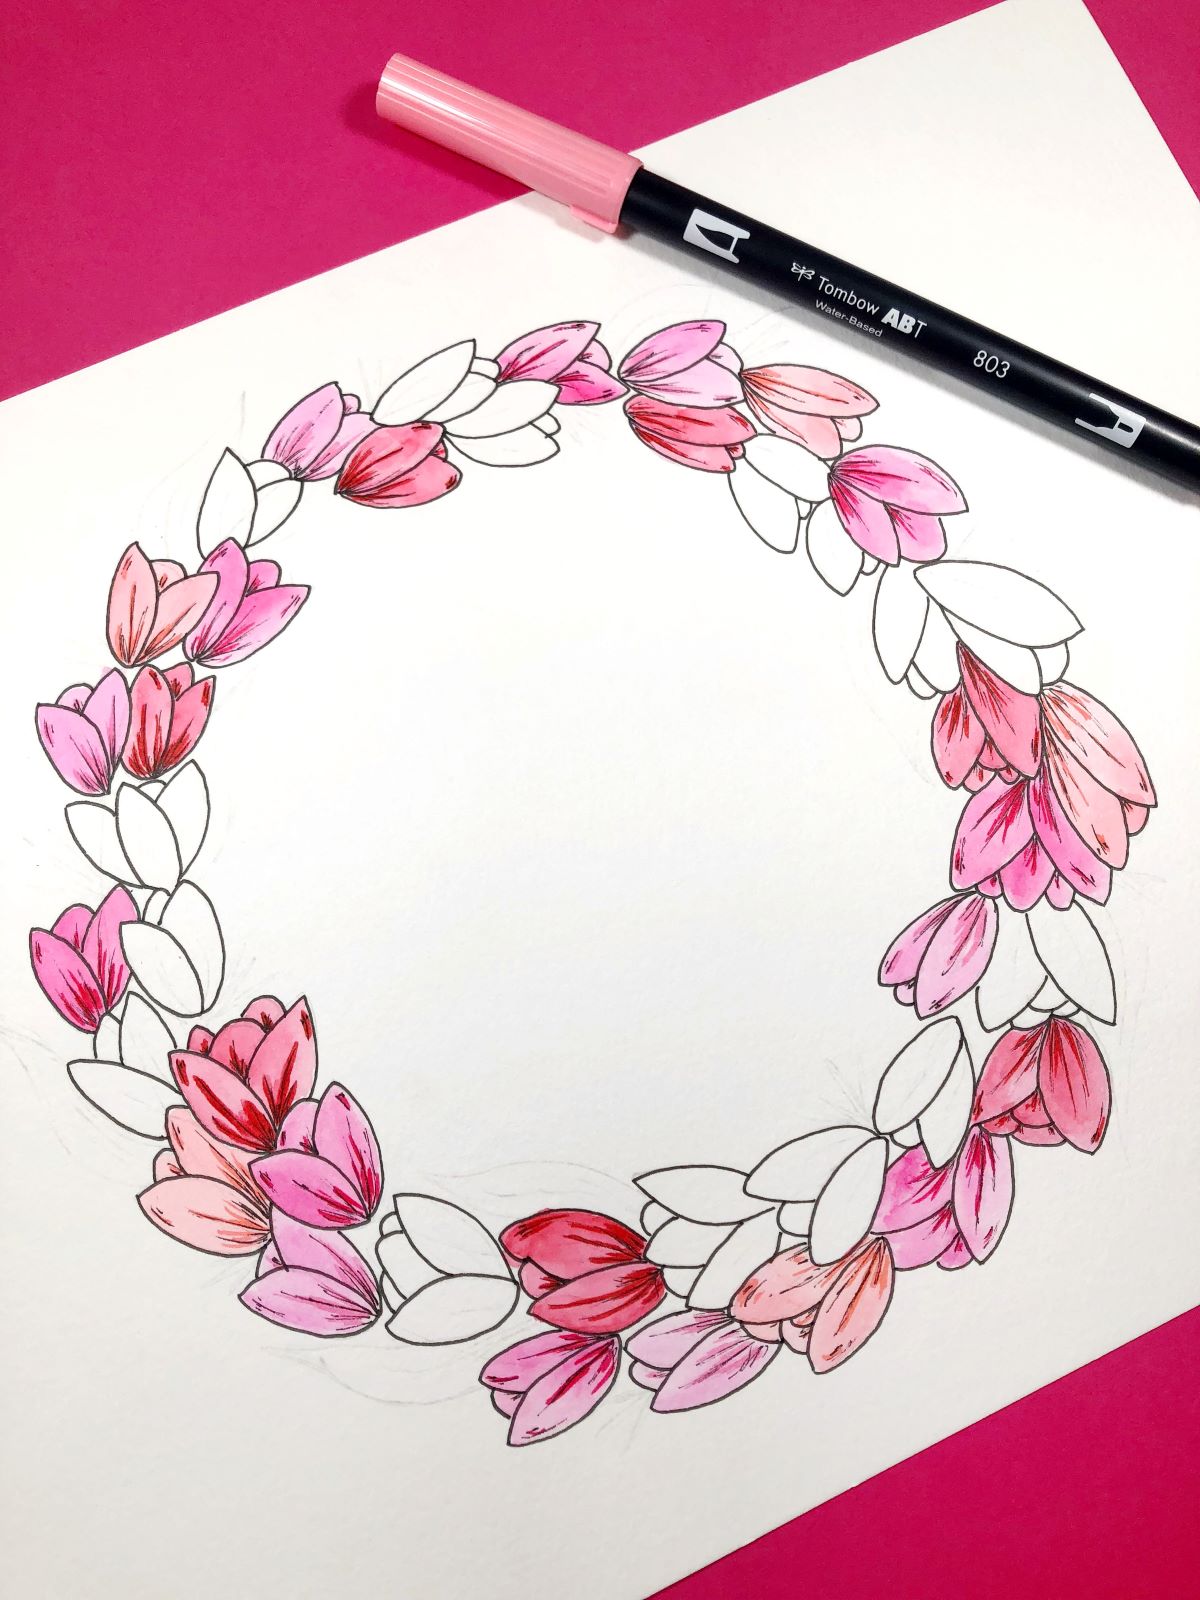 Watercolor Wreath using @tombowusa Dual Brush Pens. Learn with @aheartenedcalling #tombow #watercolor